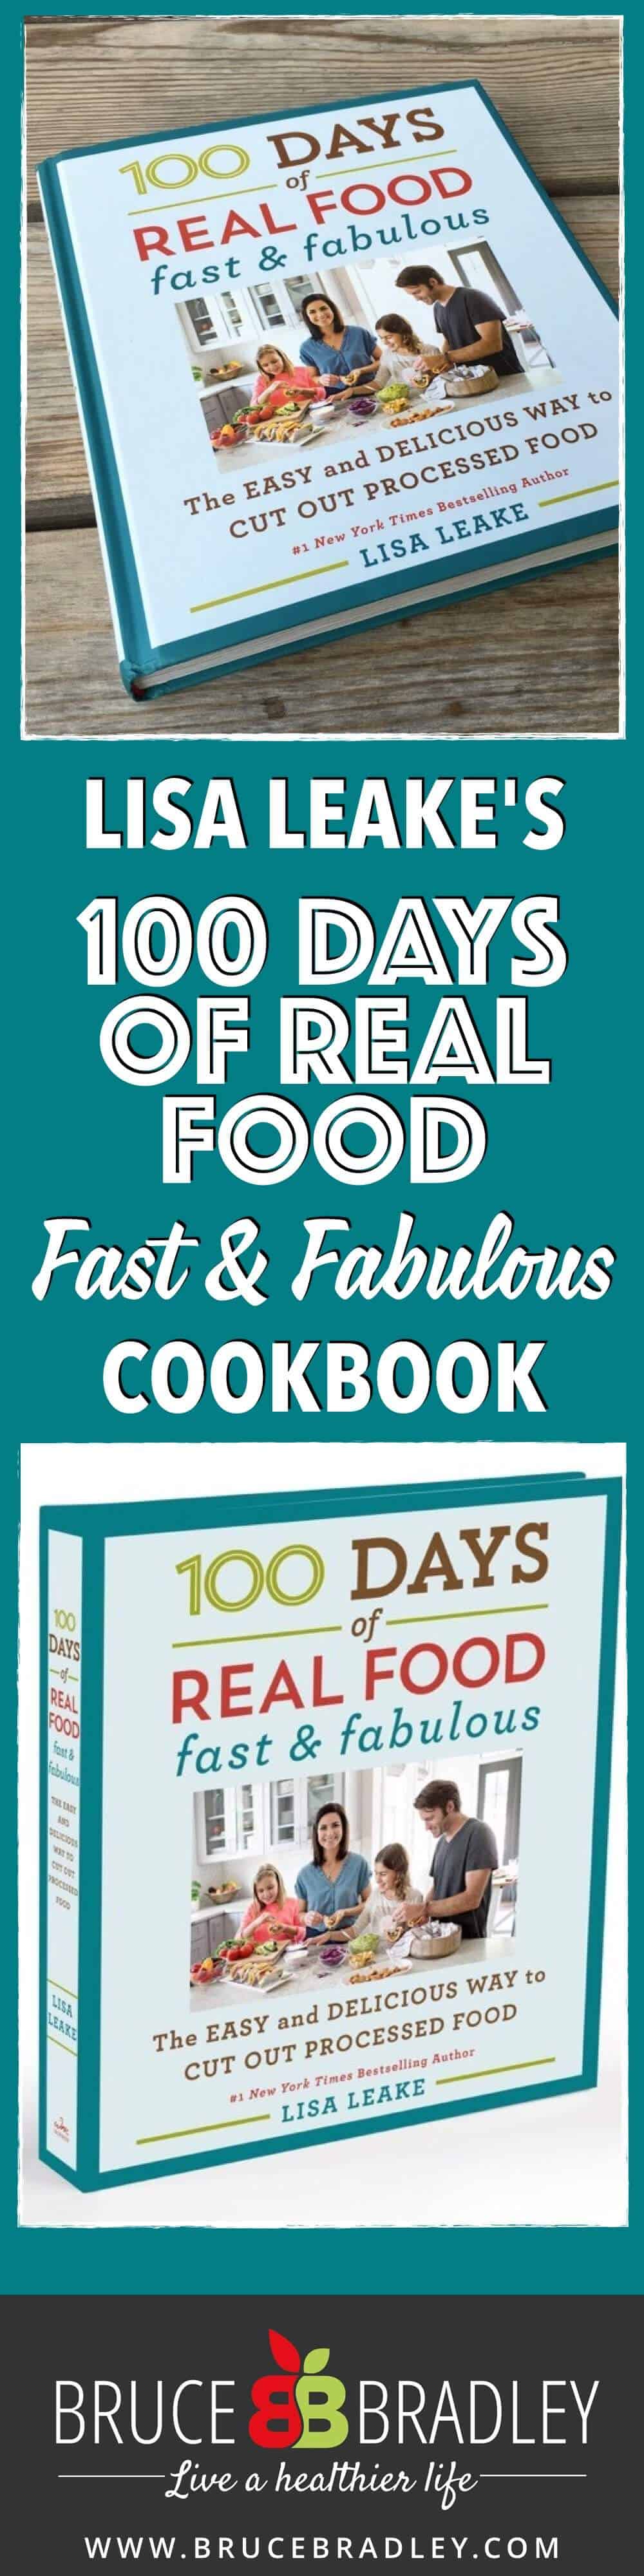 100 Days Of Real Food Fast And Fabulous Cookbook Is Filled With Over 100 Quick-And-Easy Recipes And Simple Cheat Sheets To Help Your Family Eat Real Food Without Derailing Your Busy Life. With Simple Recipes For Breakfast, Lunch, Dinner, Snacks, And Special Treats, You Truly Can'T Go Wrong With This Cookbook.